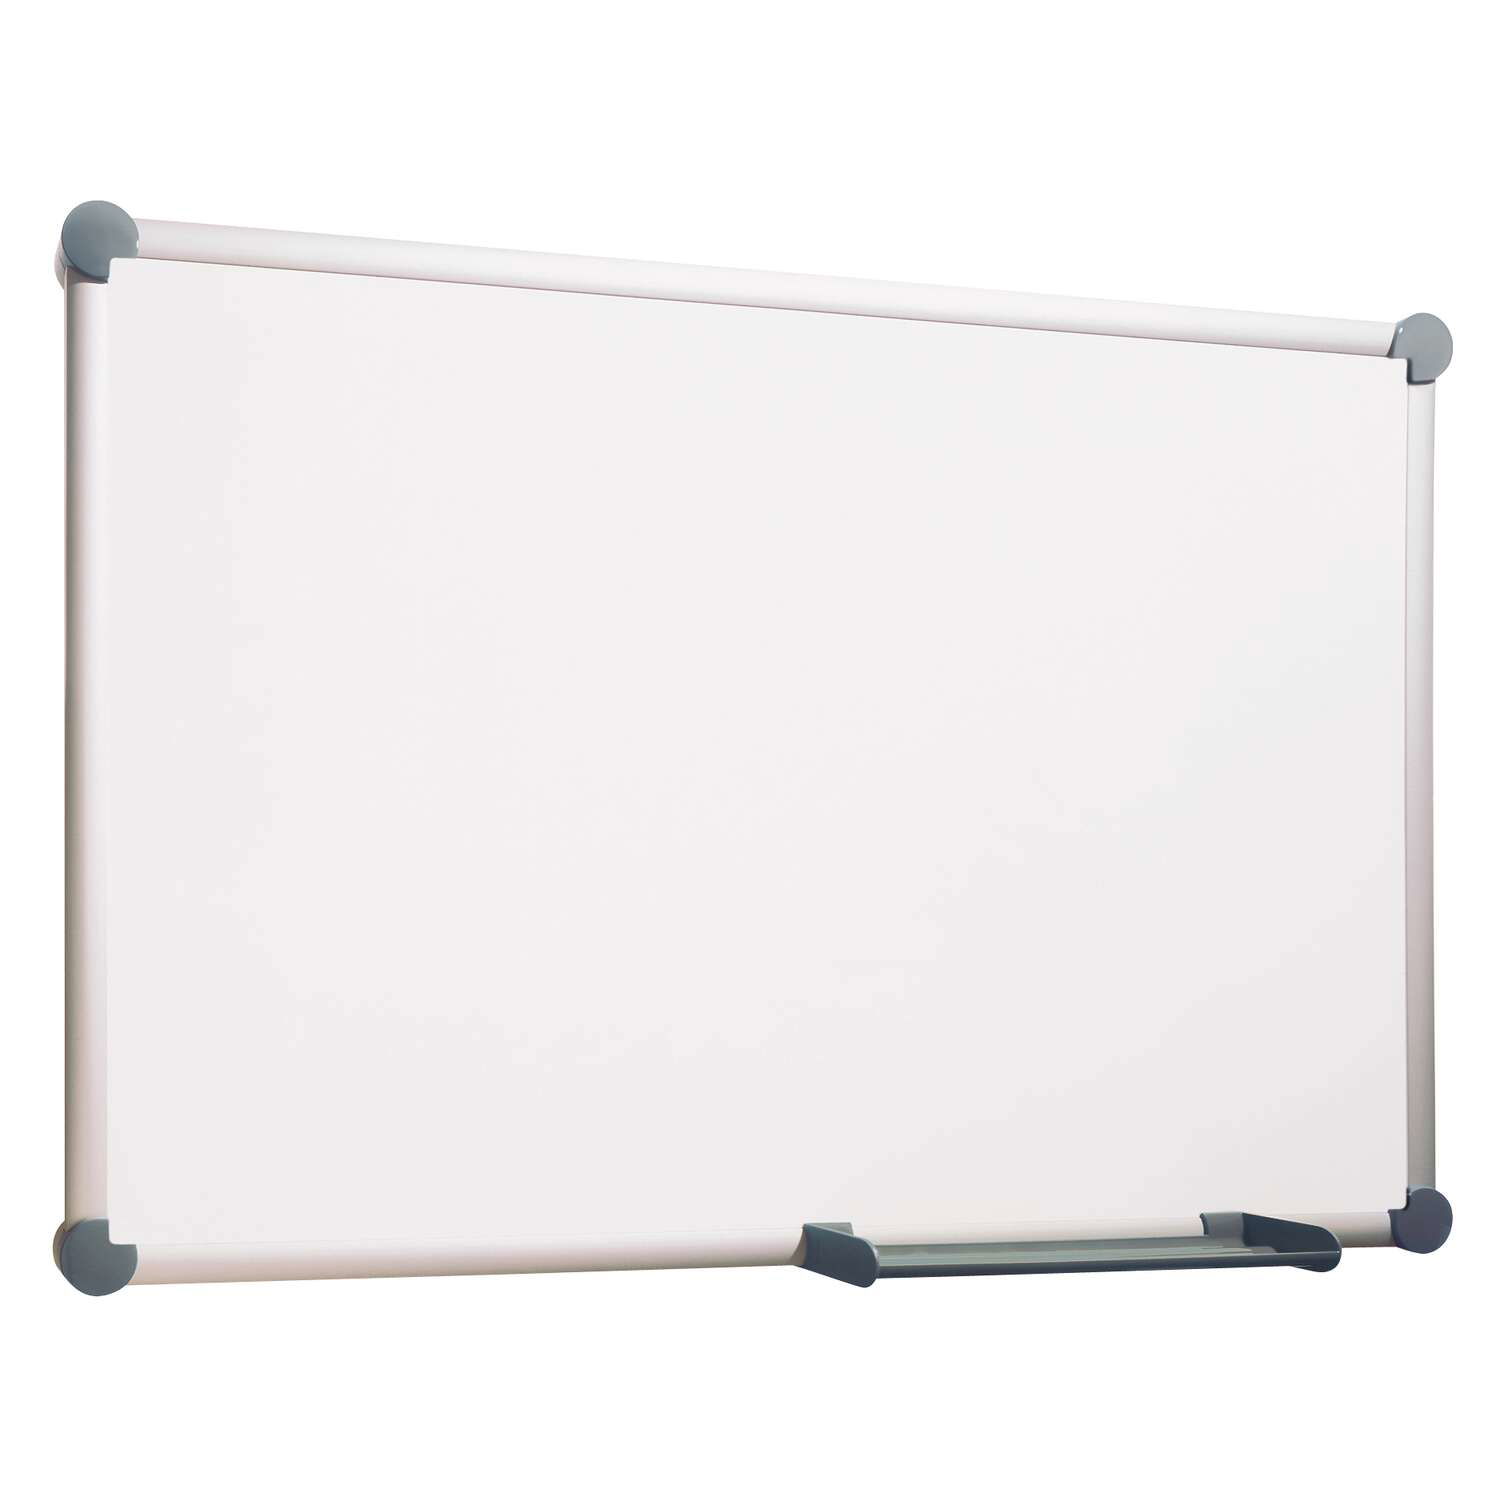 Whiteboard MAULpro, Emaille, 120x240 cm